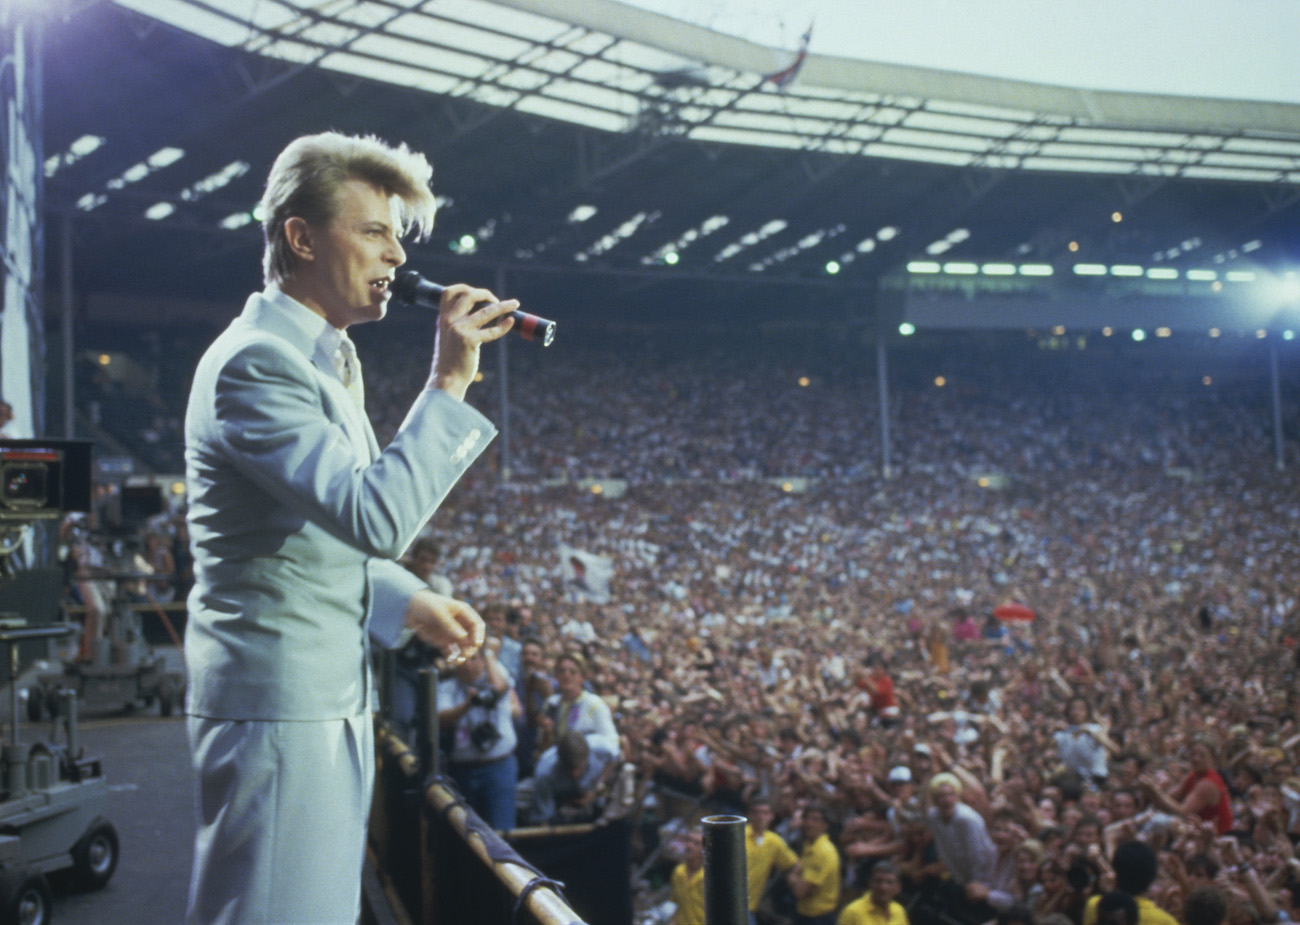 David Bowie performing in a suit at Live Aid, London, 1985.